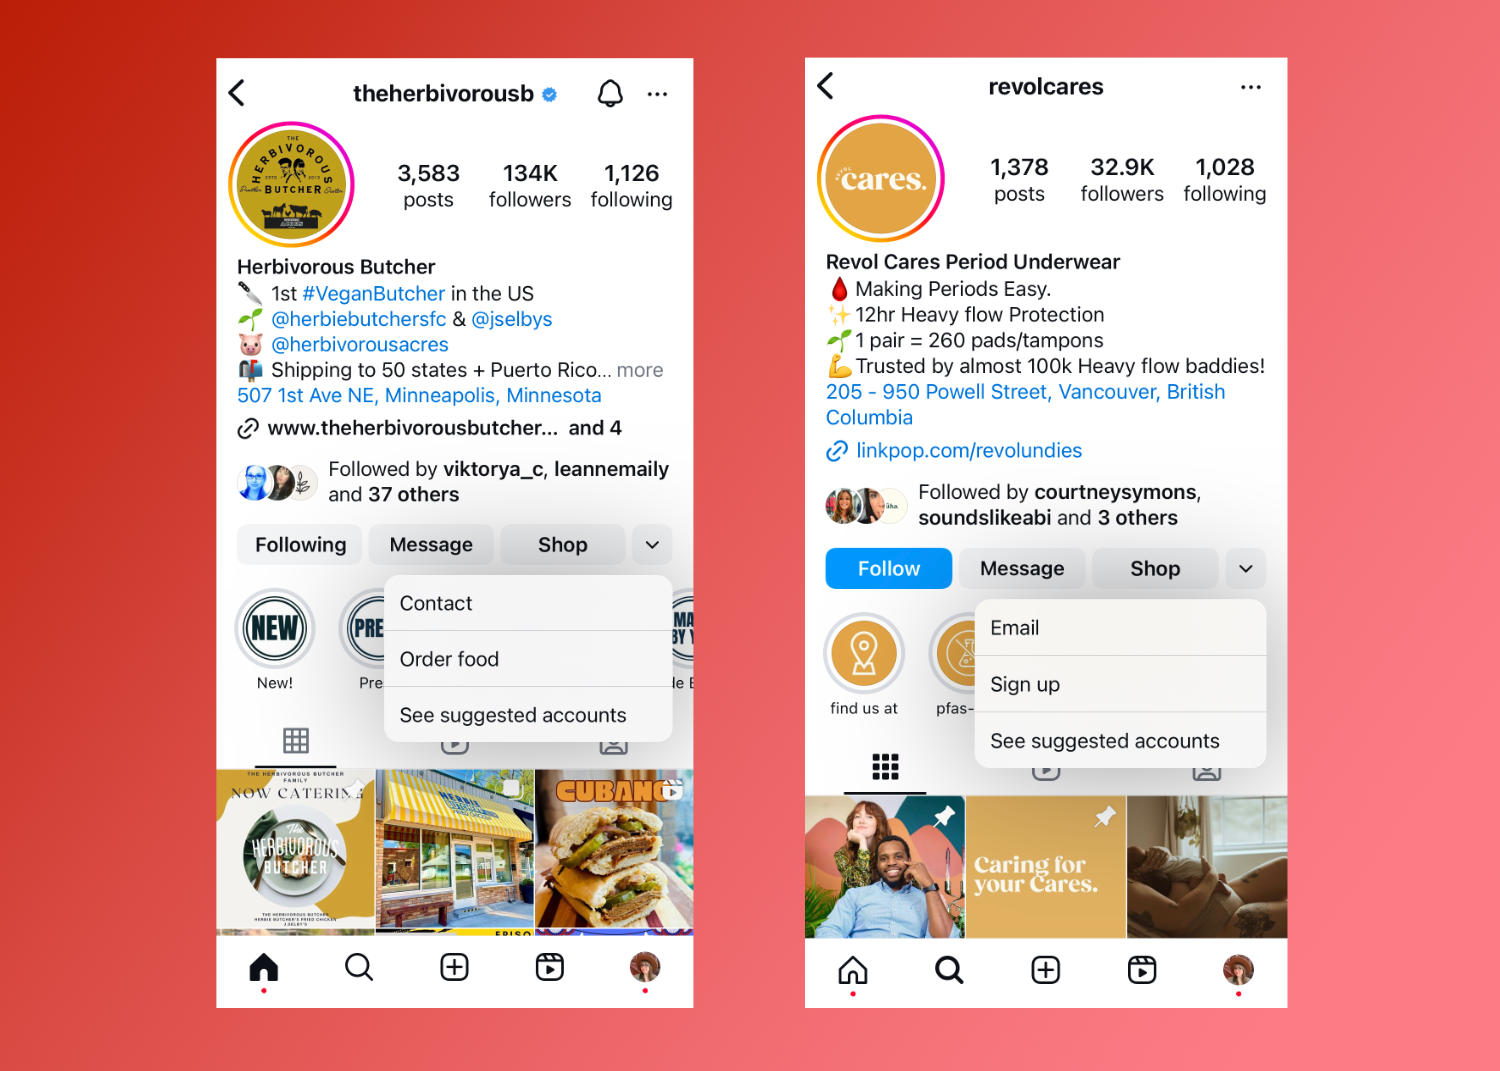 Side by side views of social media accounts in a mobile view